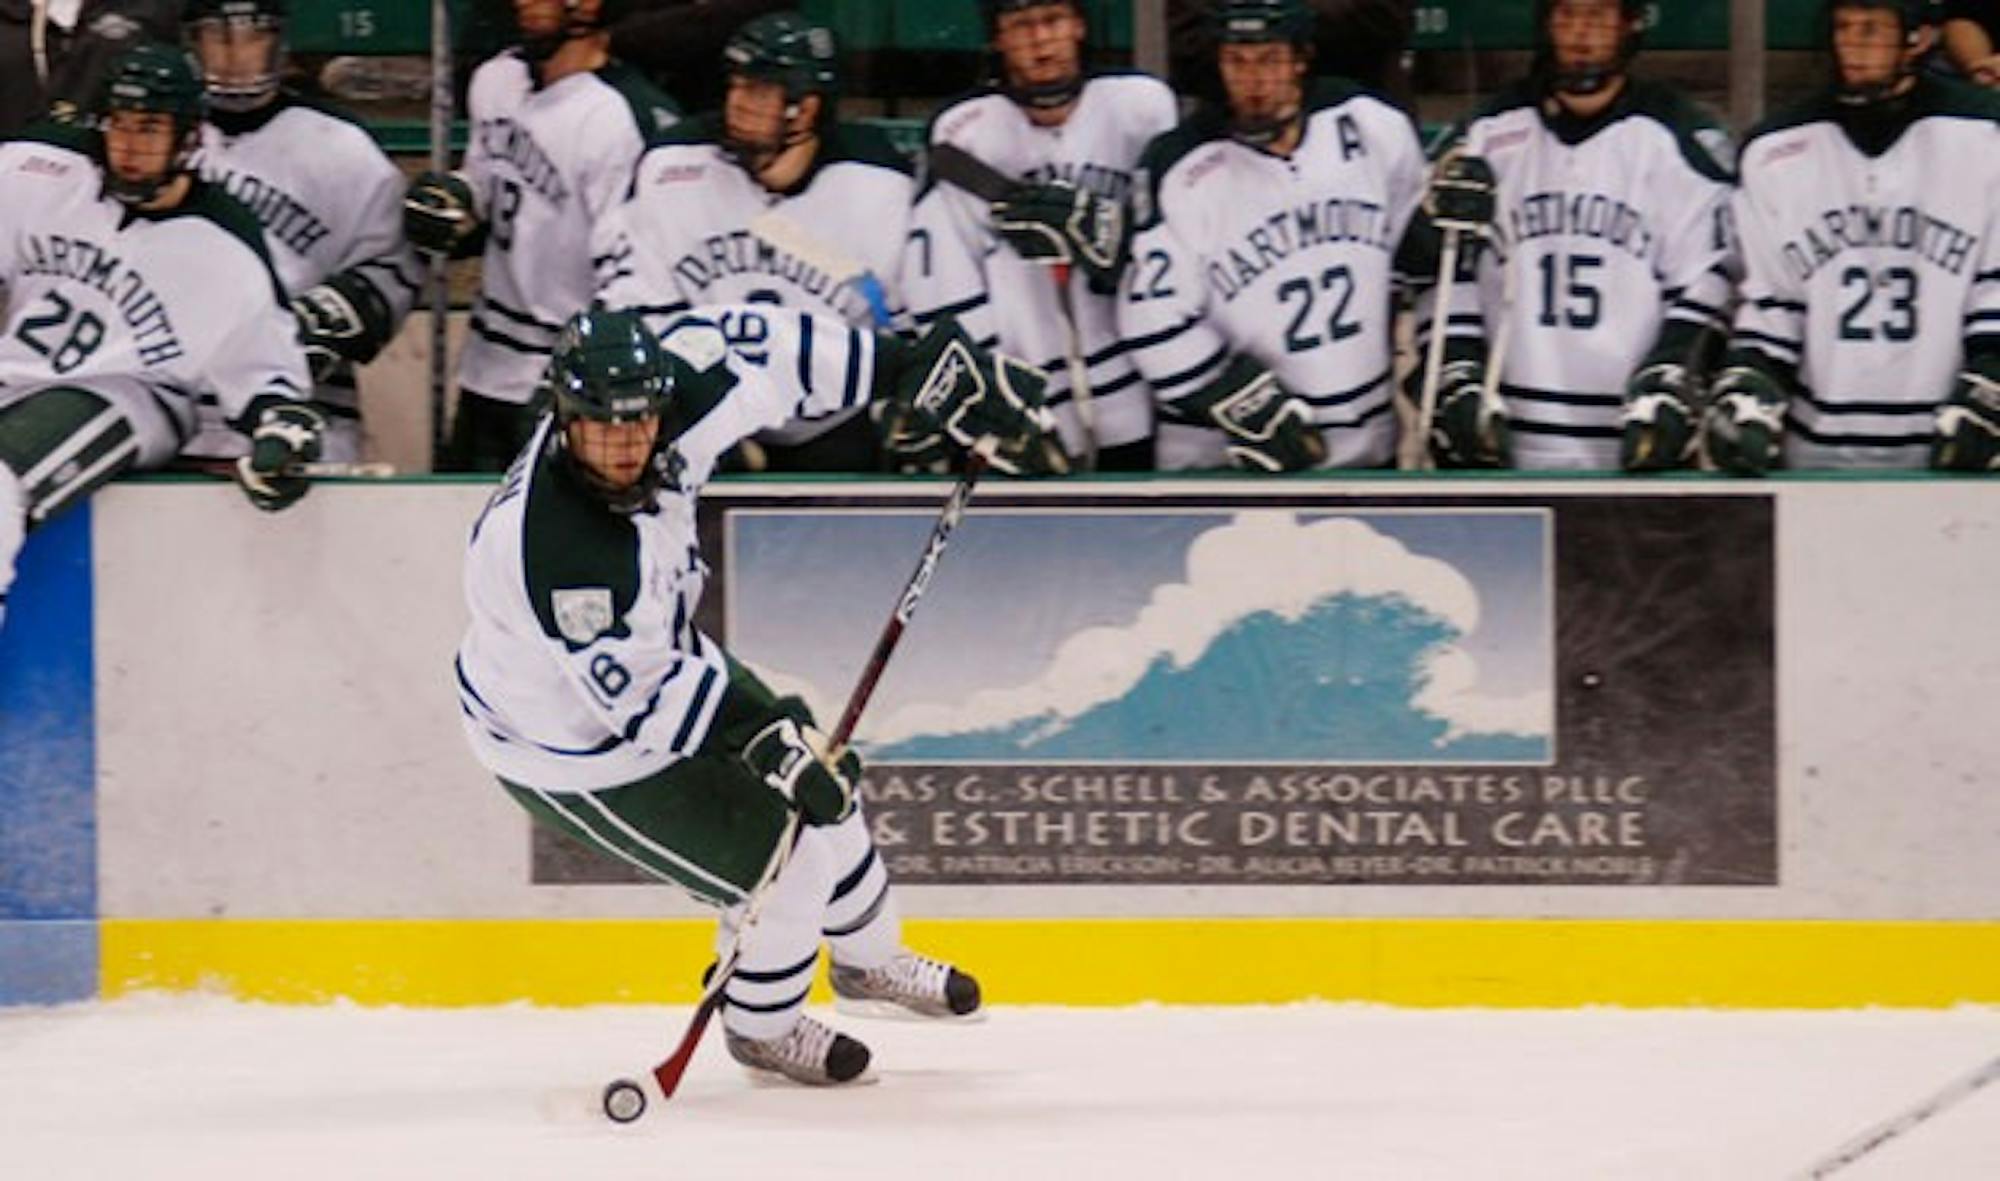 Big Green hockey started the weekend off strong with a home victory over Union, but lost the next night to RPI.